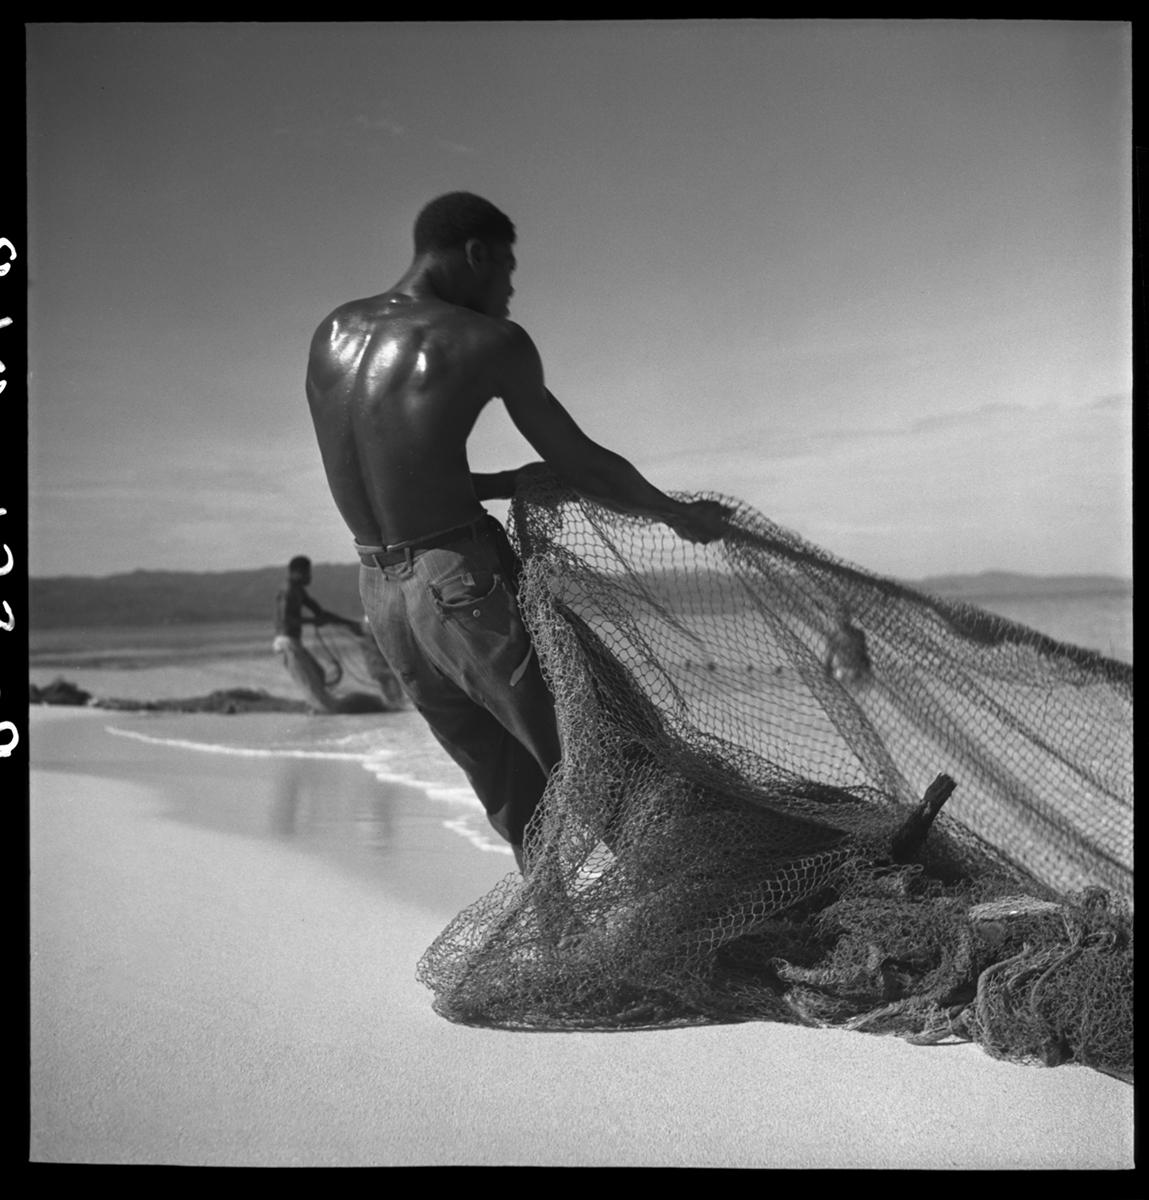 Montego Bay Fishermen 1940s Toni Frissell Limited Signature Stamped Edition

Fishermen at work on a beach in Montego Bay Jamaica circa 1940.

by Toni Frissell

40 x 40" inches / 101 x 101 cm paper size 
Silver gelatine fibre print
unframed 
(framing